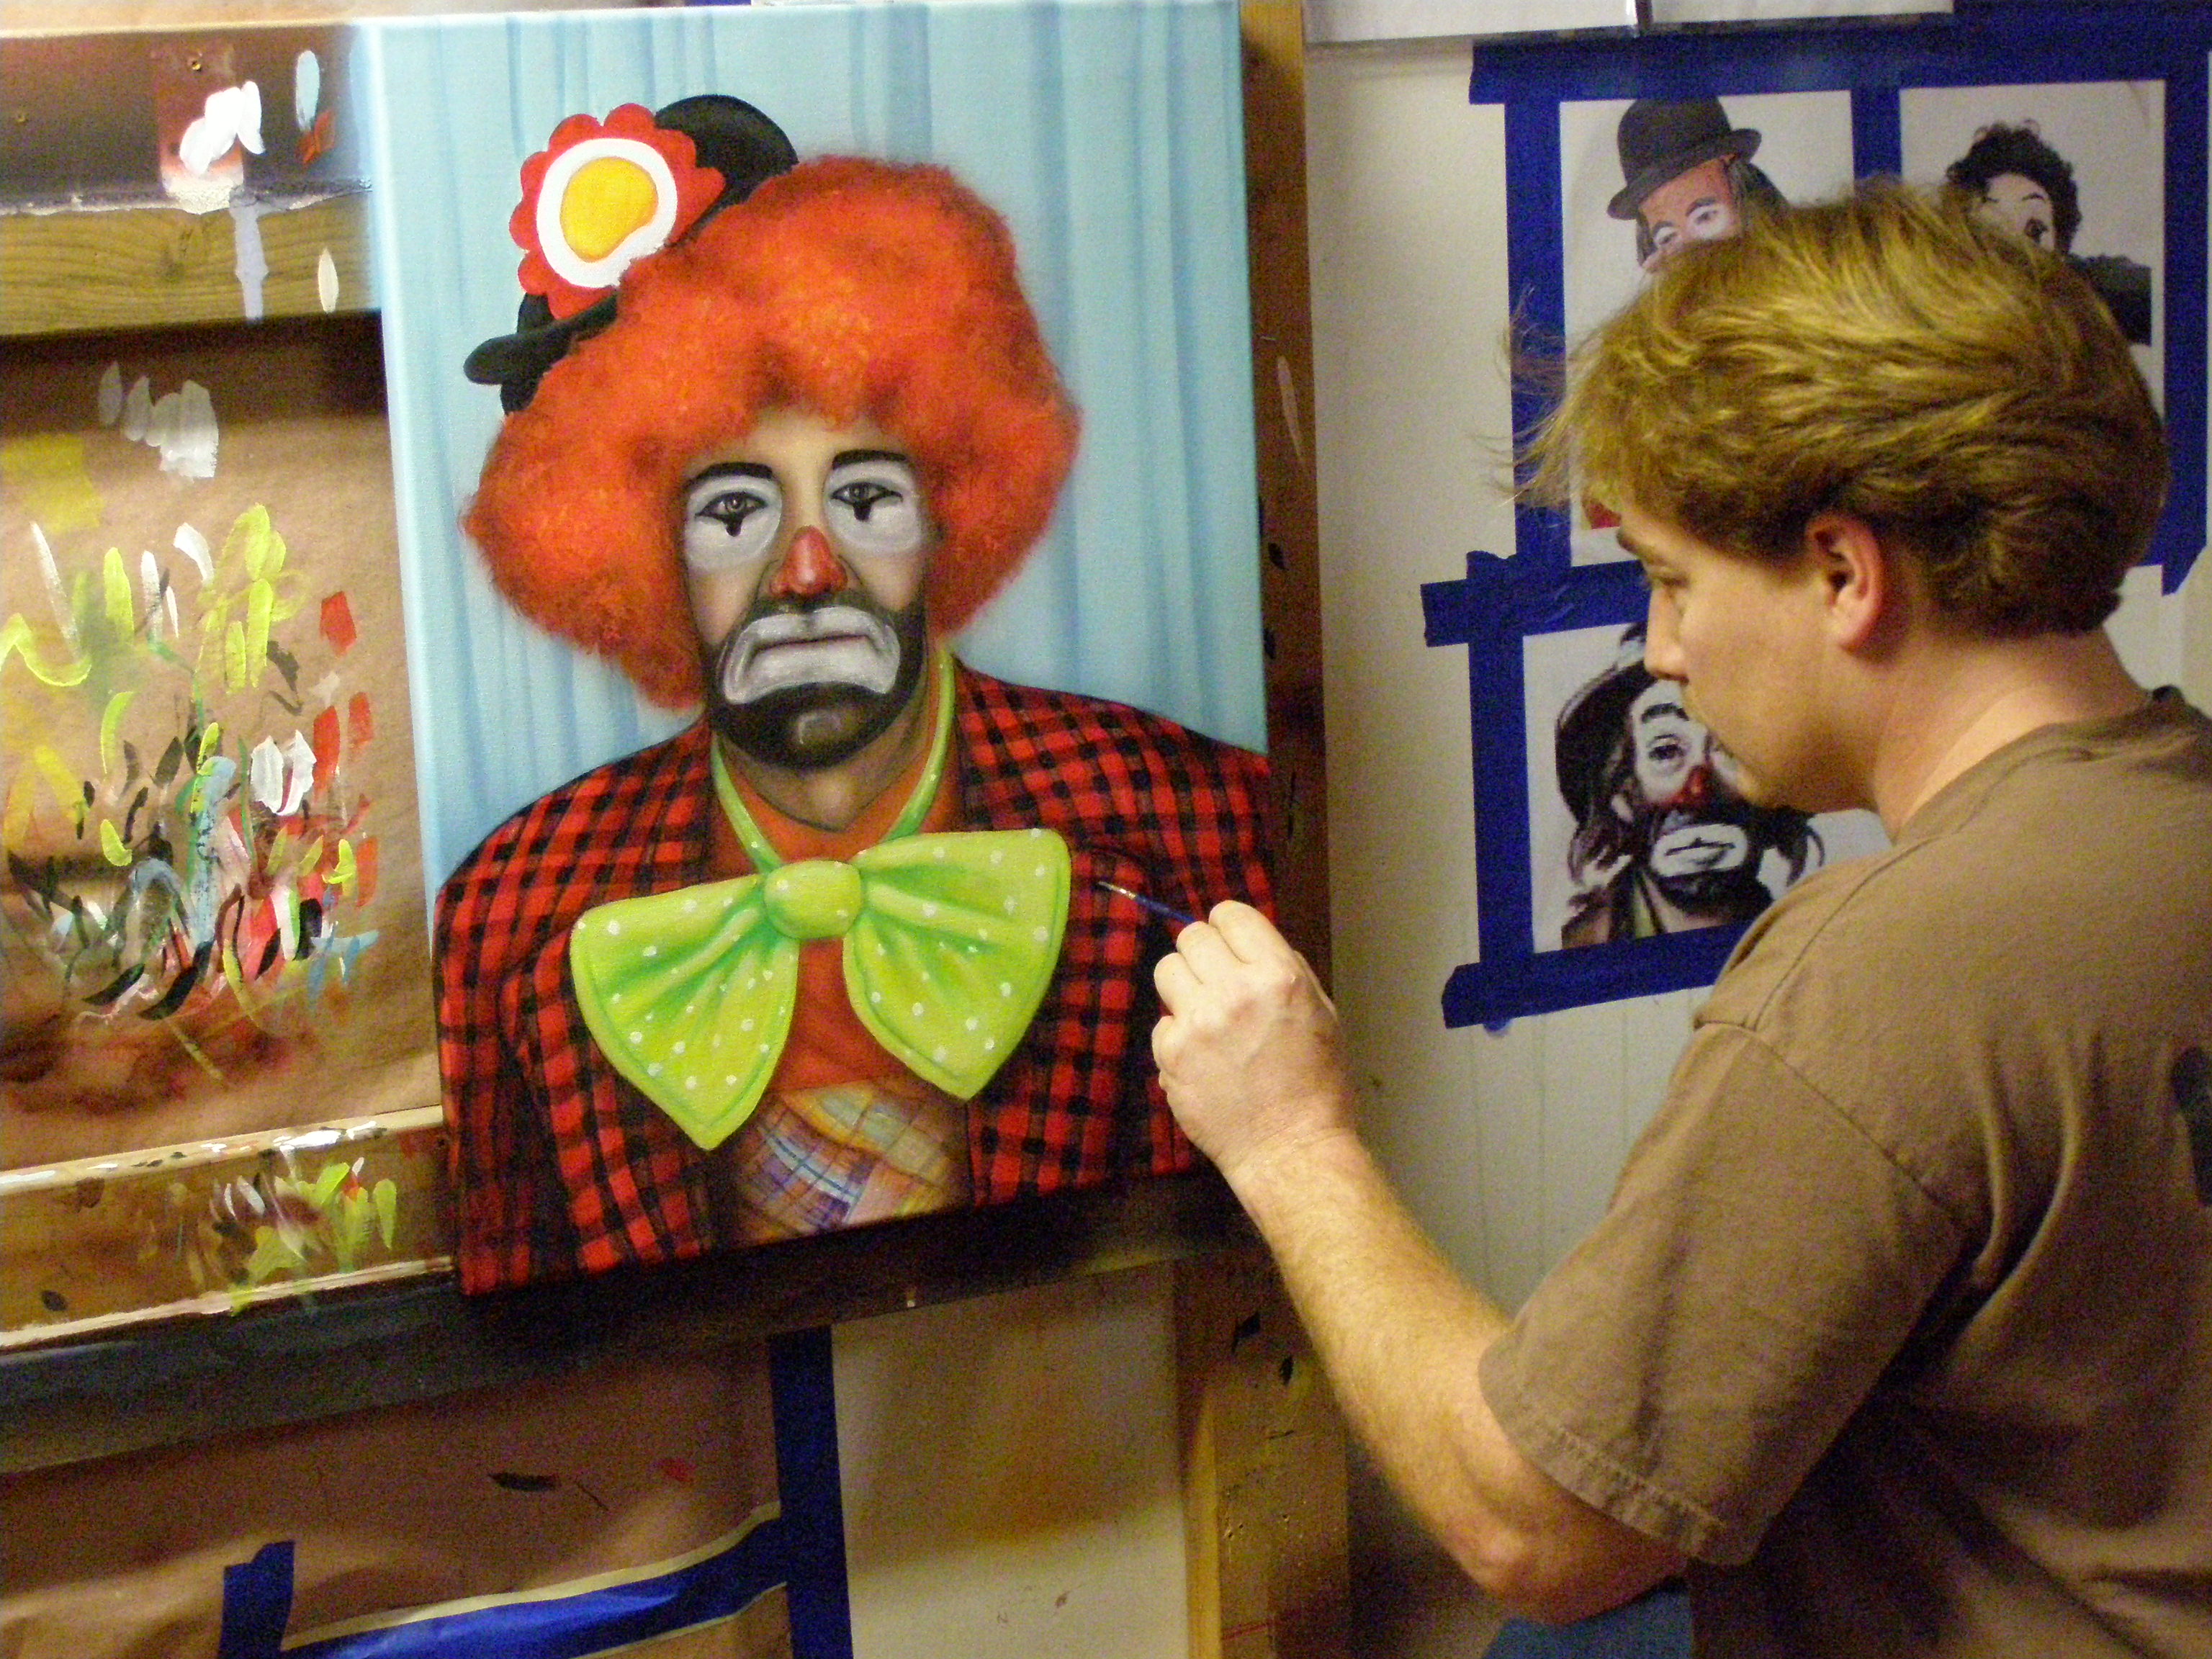 Kevin painting a portrait of the character 